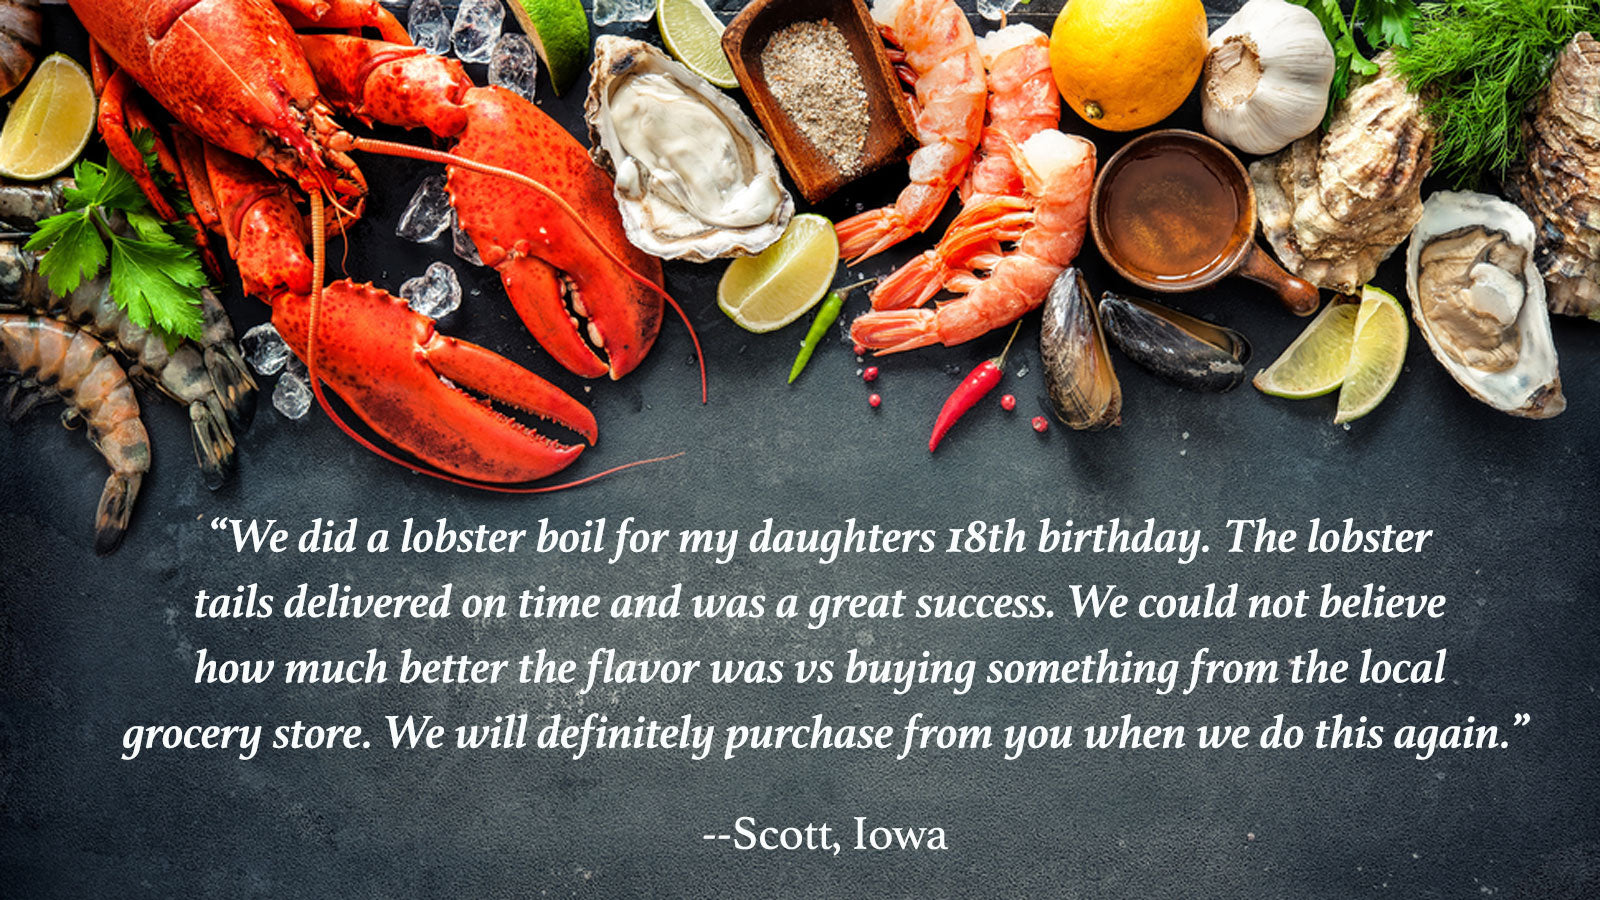 About us | Get Maine Lobster